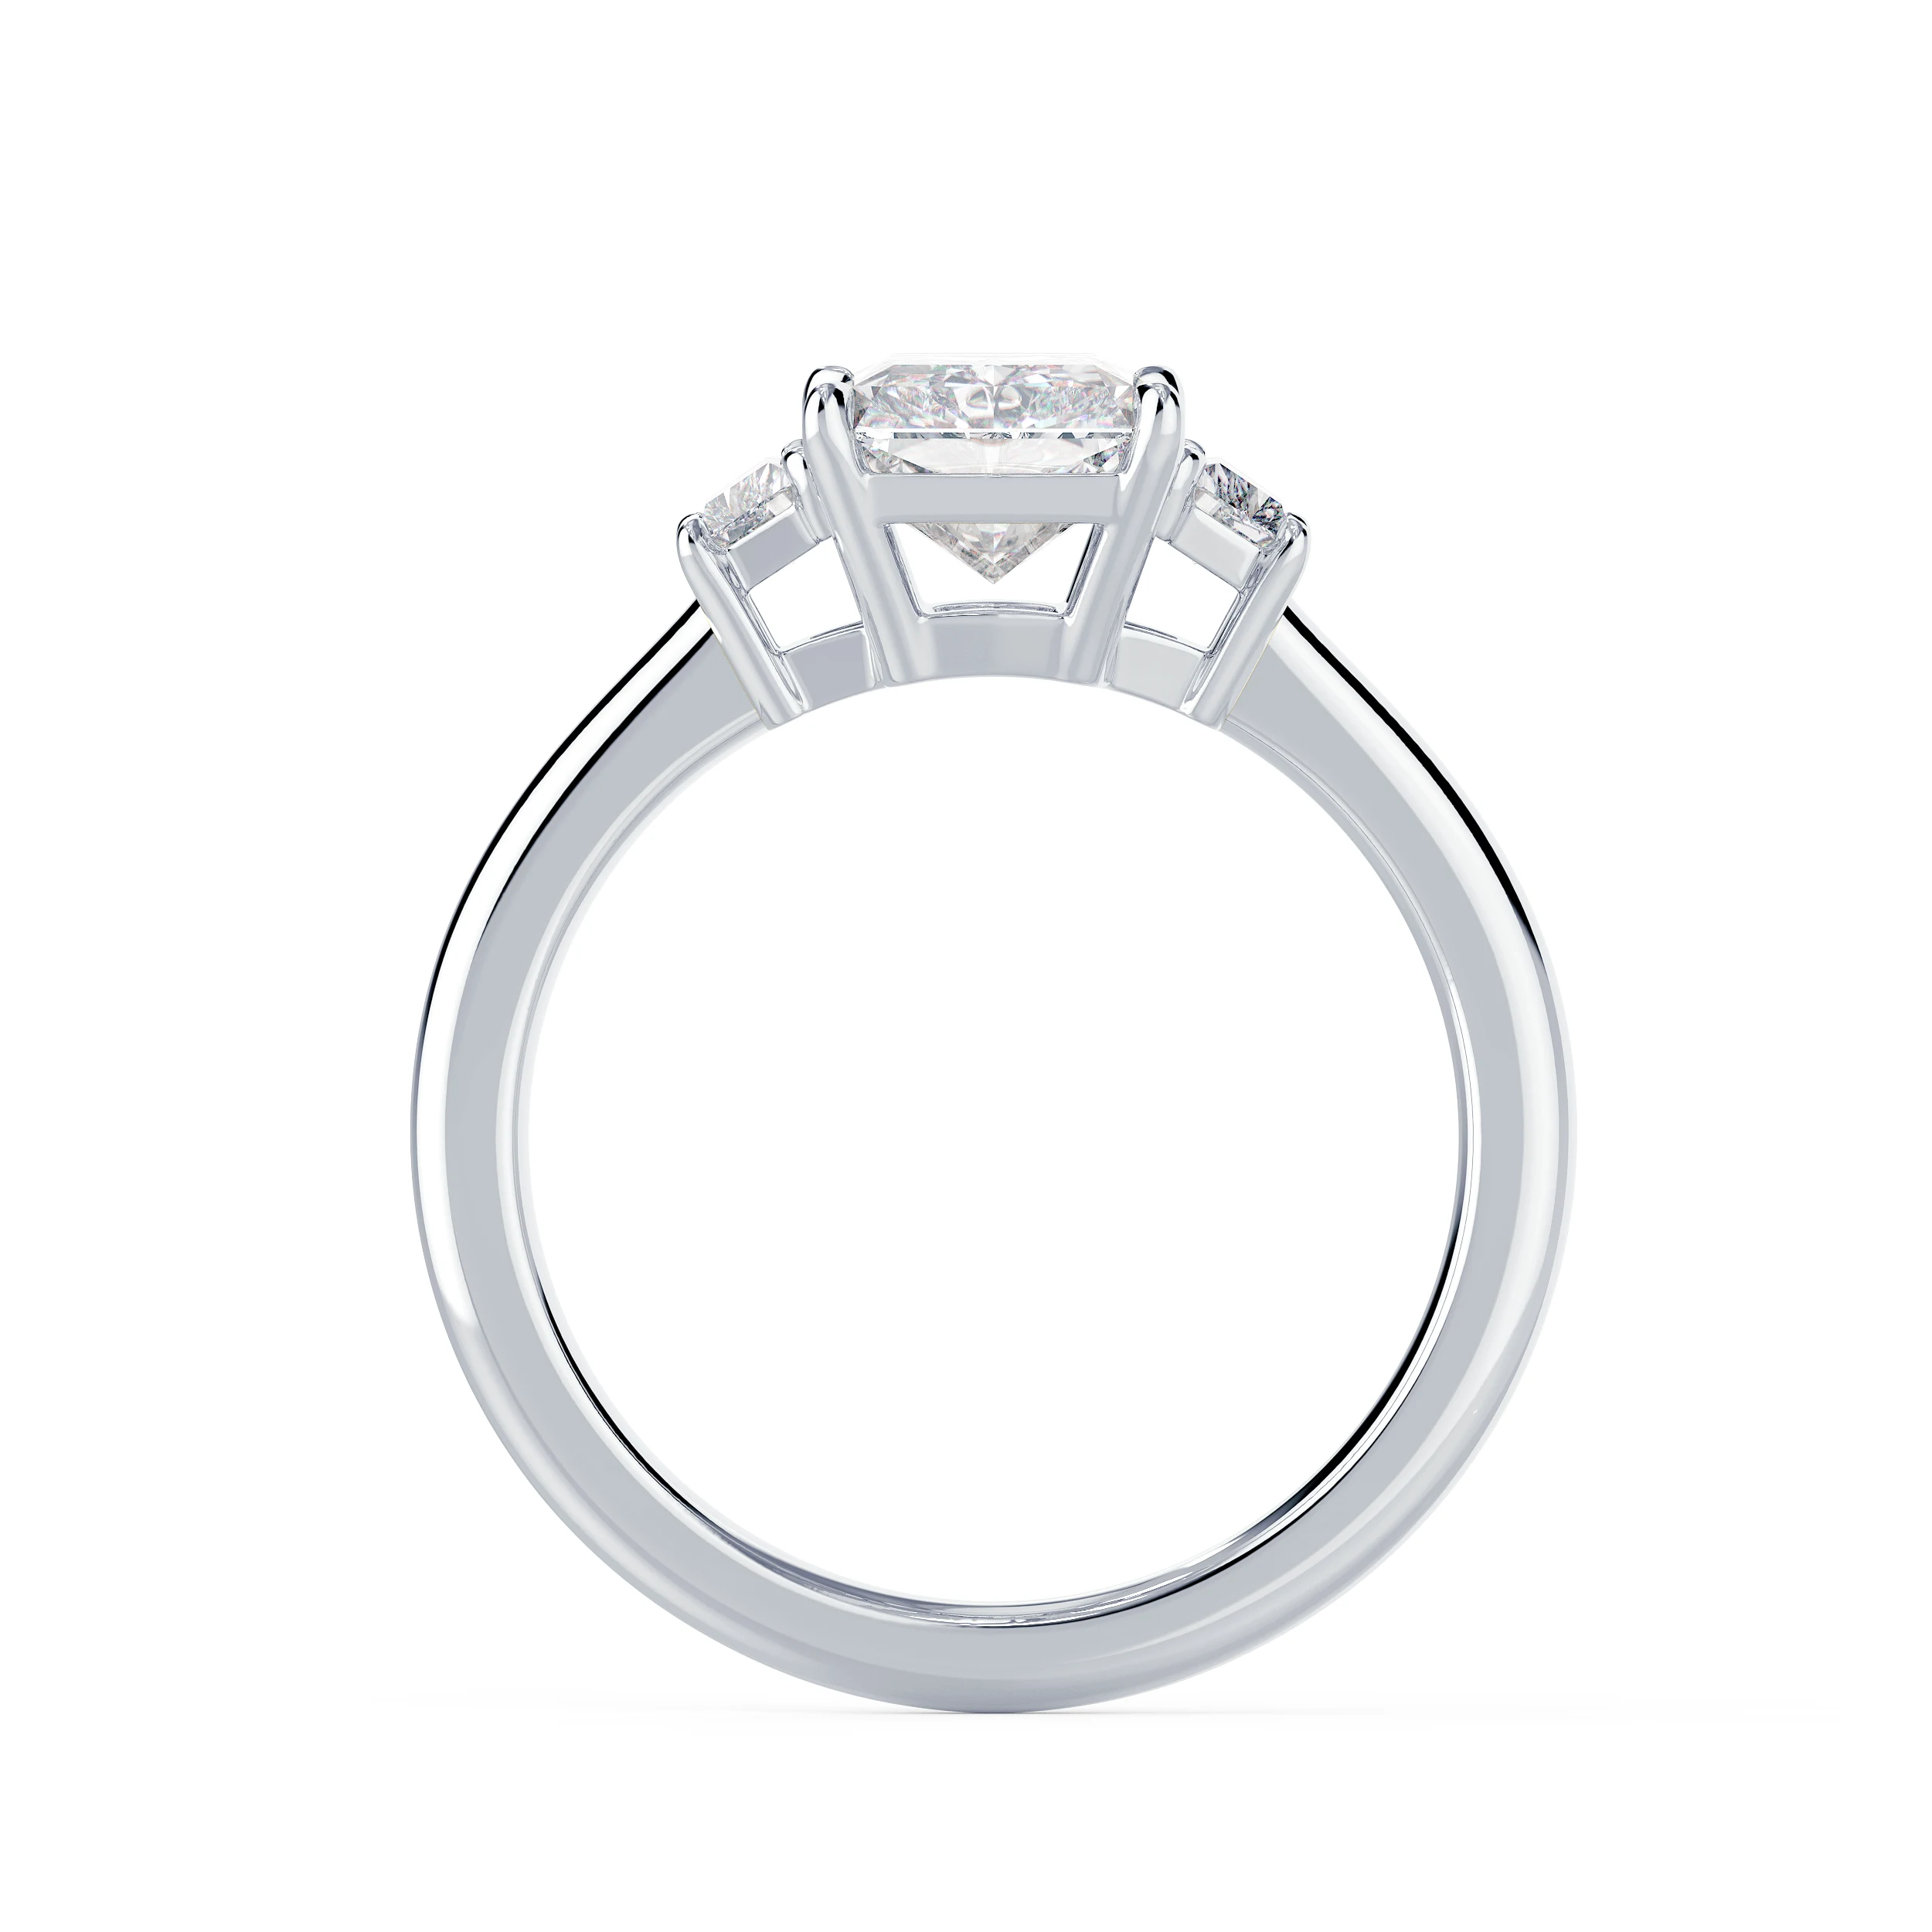 Lab Grown Diamonds set in White Gold Radiant and Trapezoid Diamond Engagement Ring (Profile View)